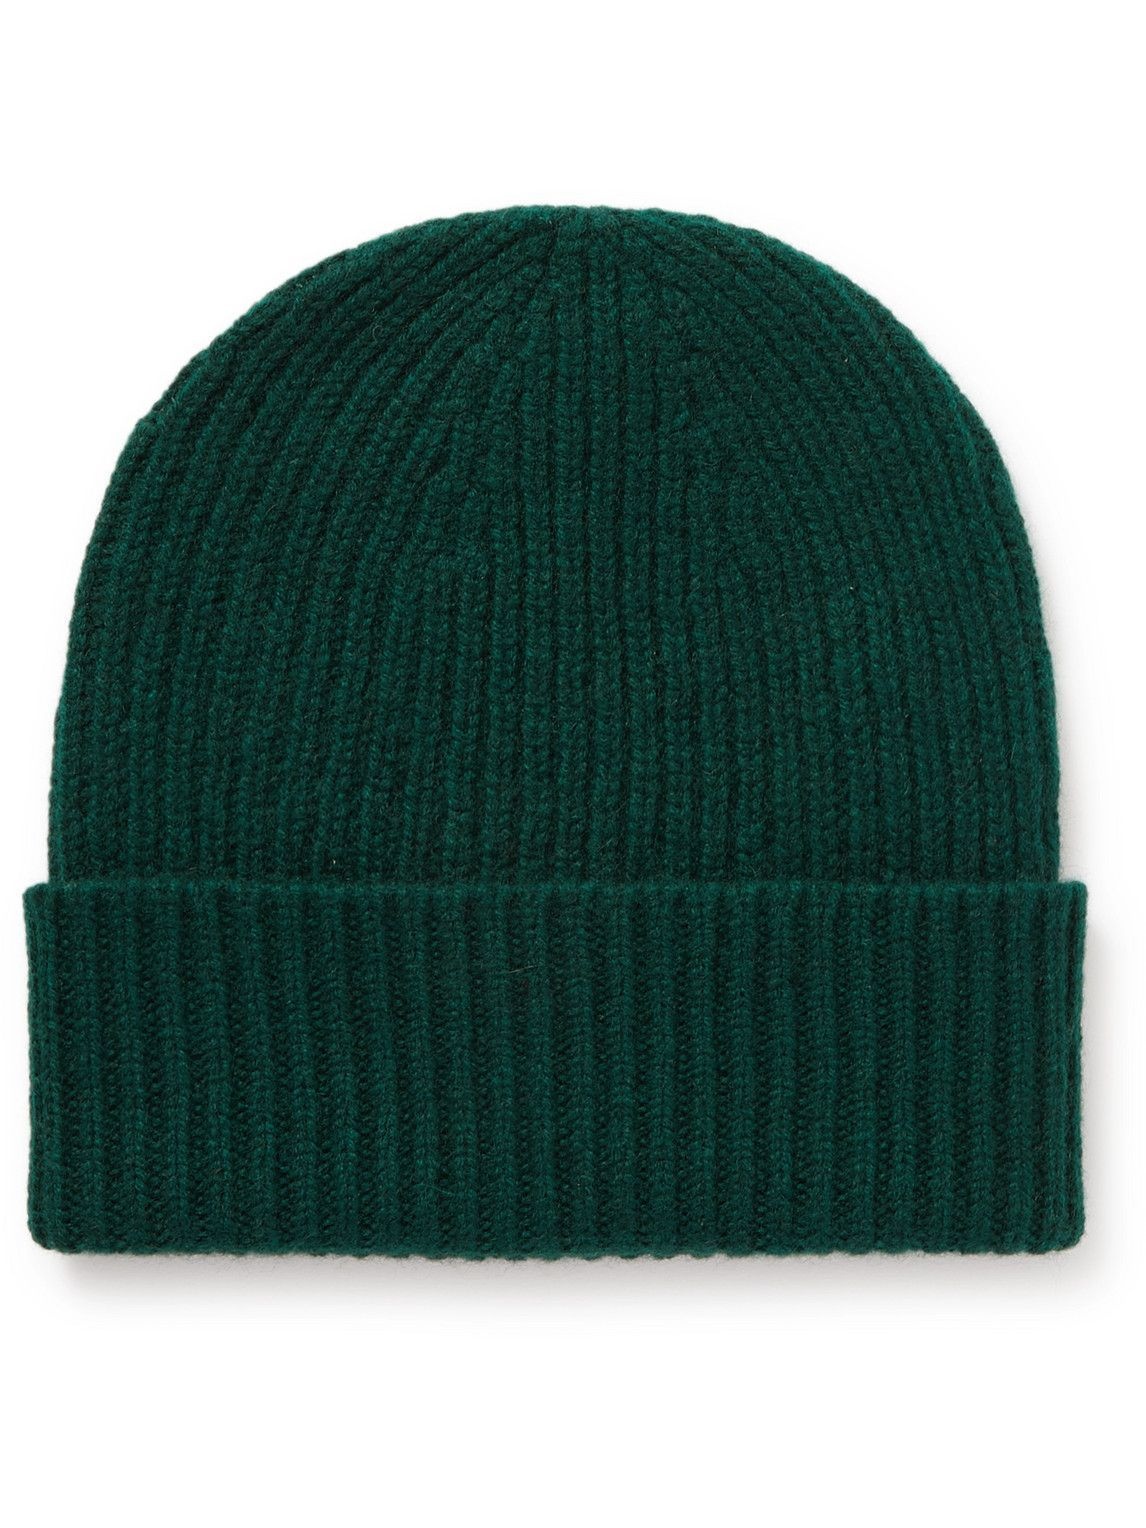 Anderson & Sheppard - Ribbed Cashmere Beanie Anderson & Sheppard